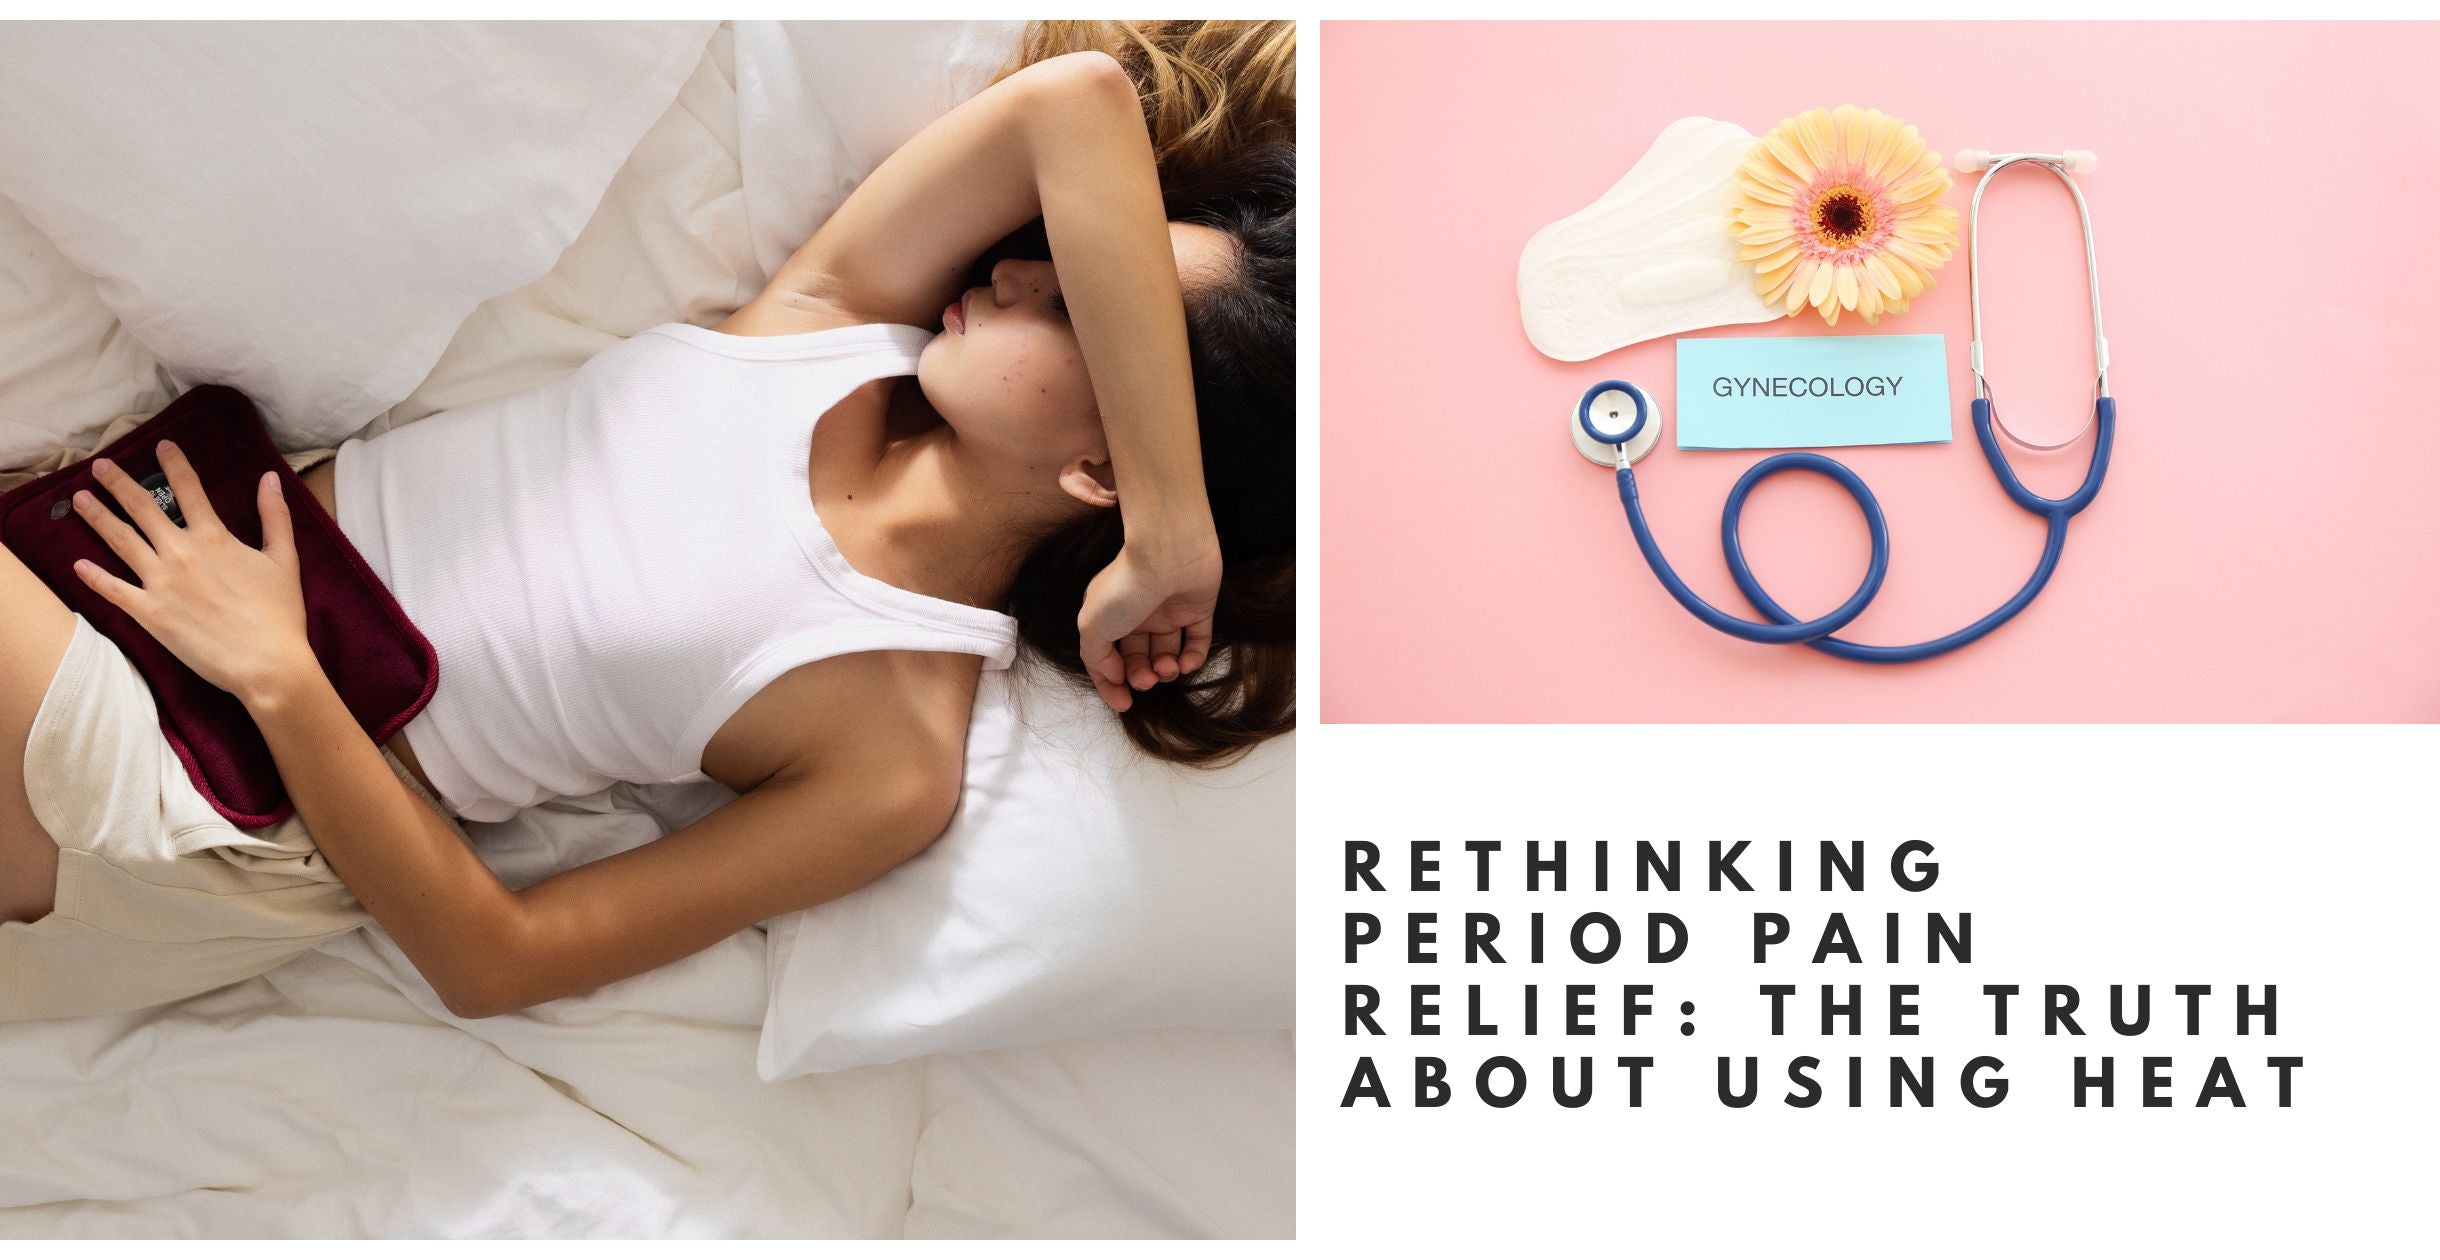 Rethinking Period Pain Relief: The Truth About Using Heat